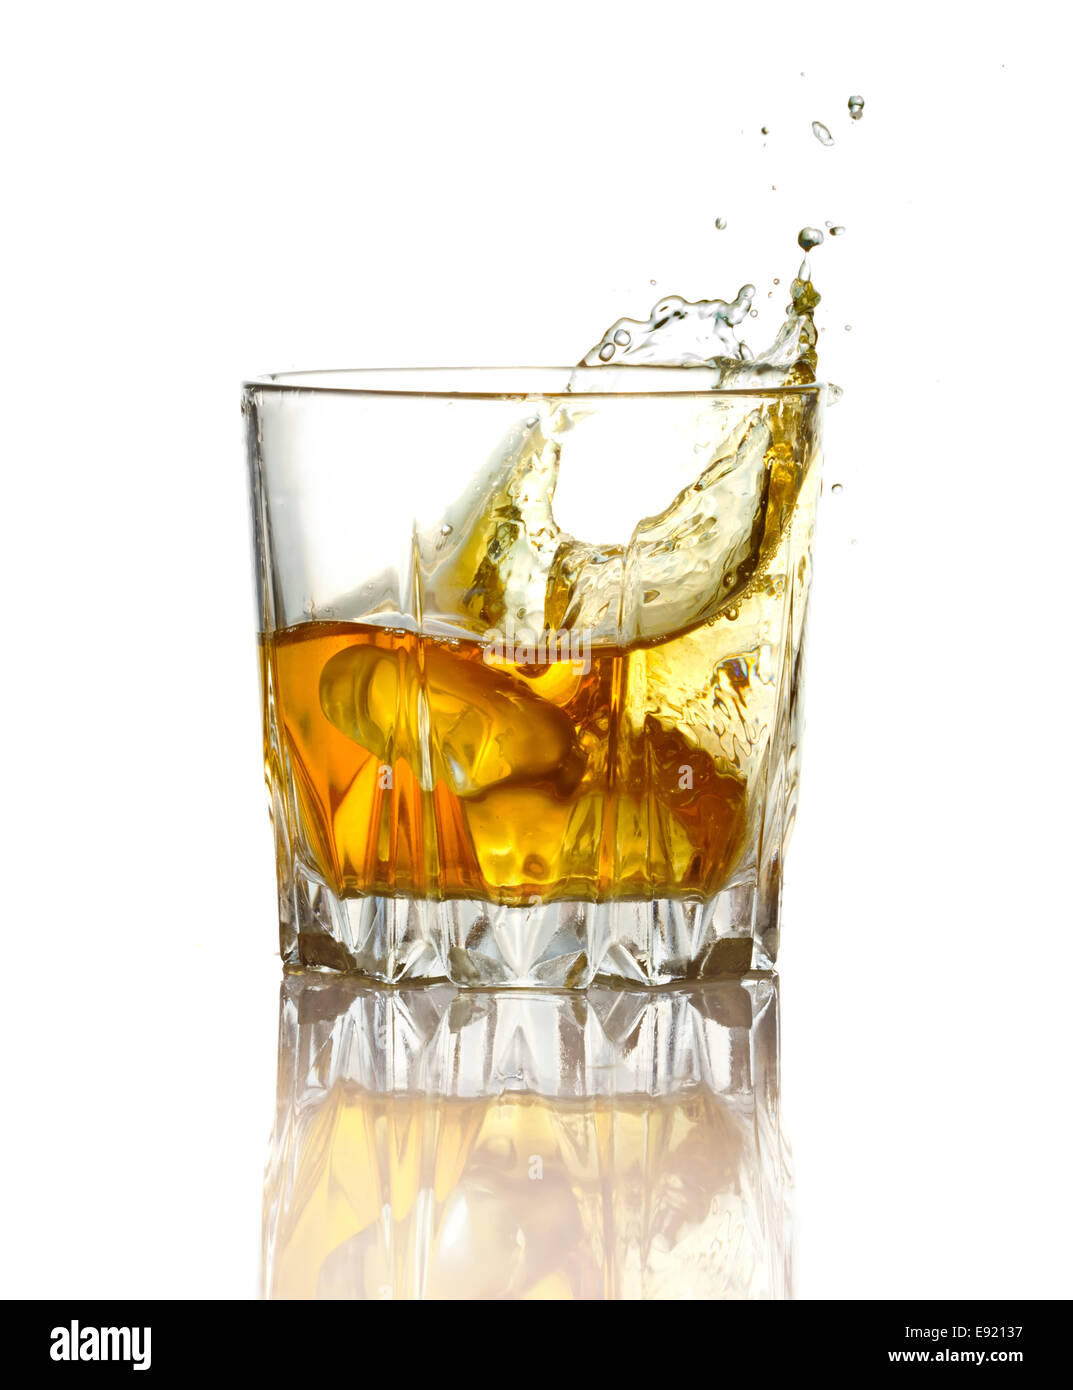 https://c8.alamy.com/comp/E92137/splash-in-glass-of-whiskey-and-ice-isolated-E92137.jpg